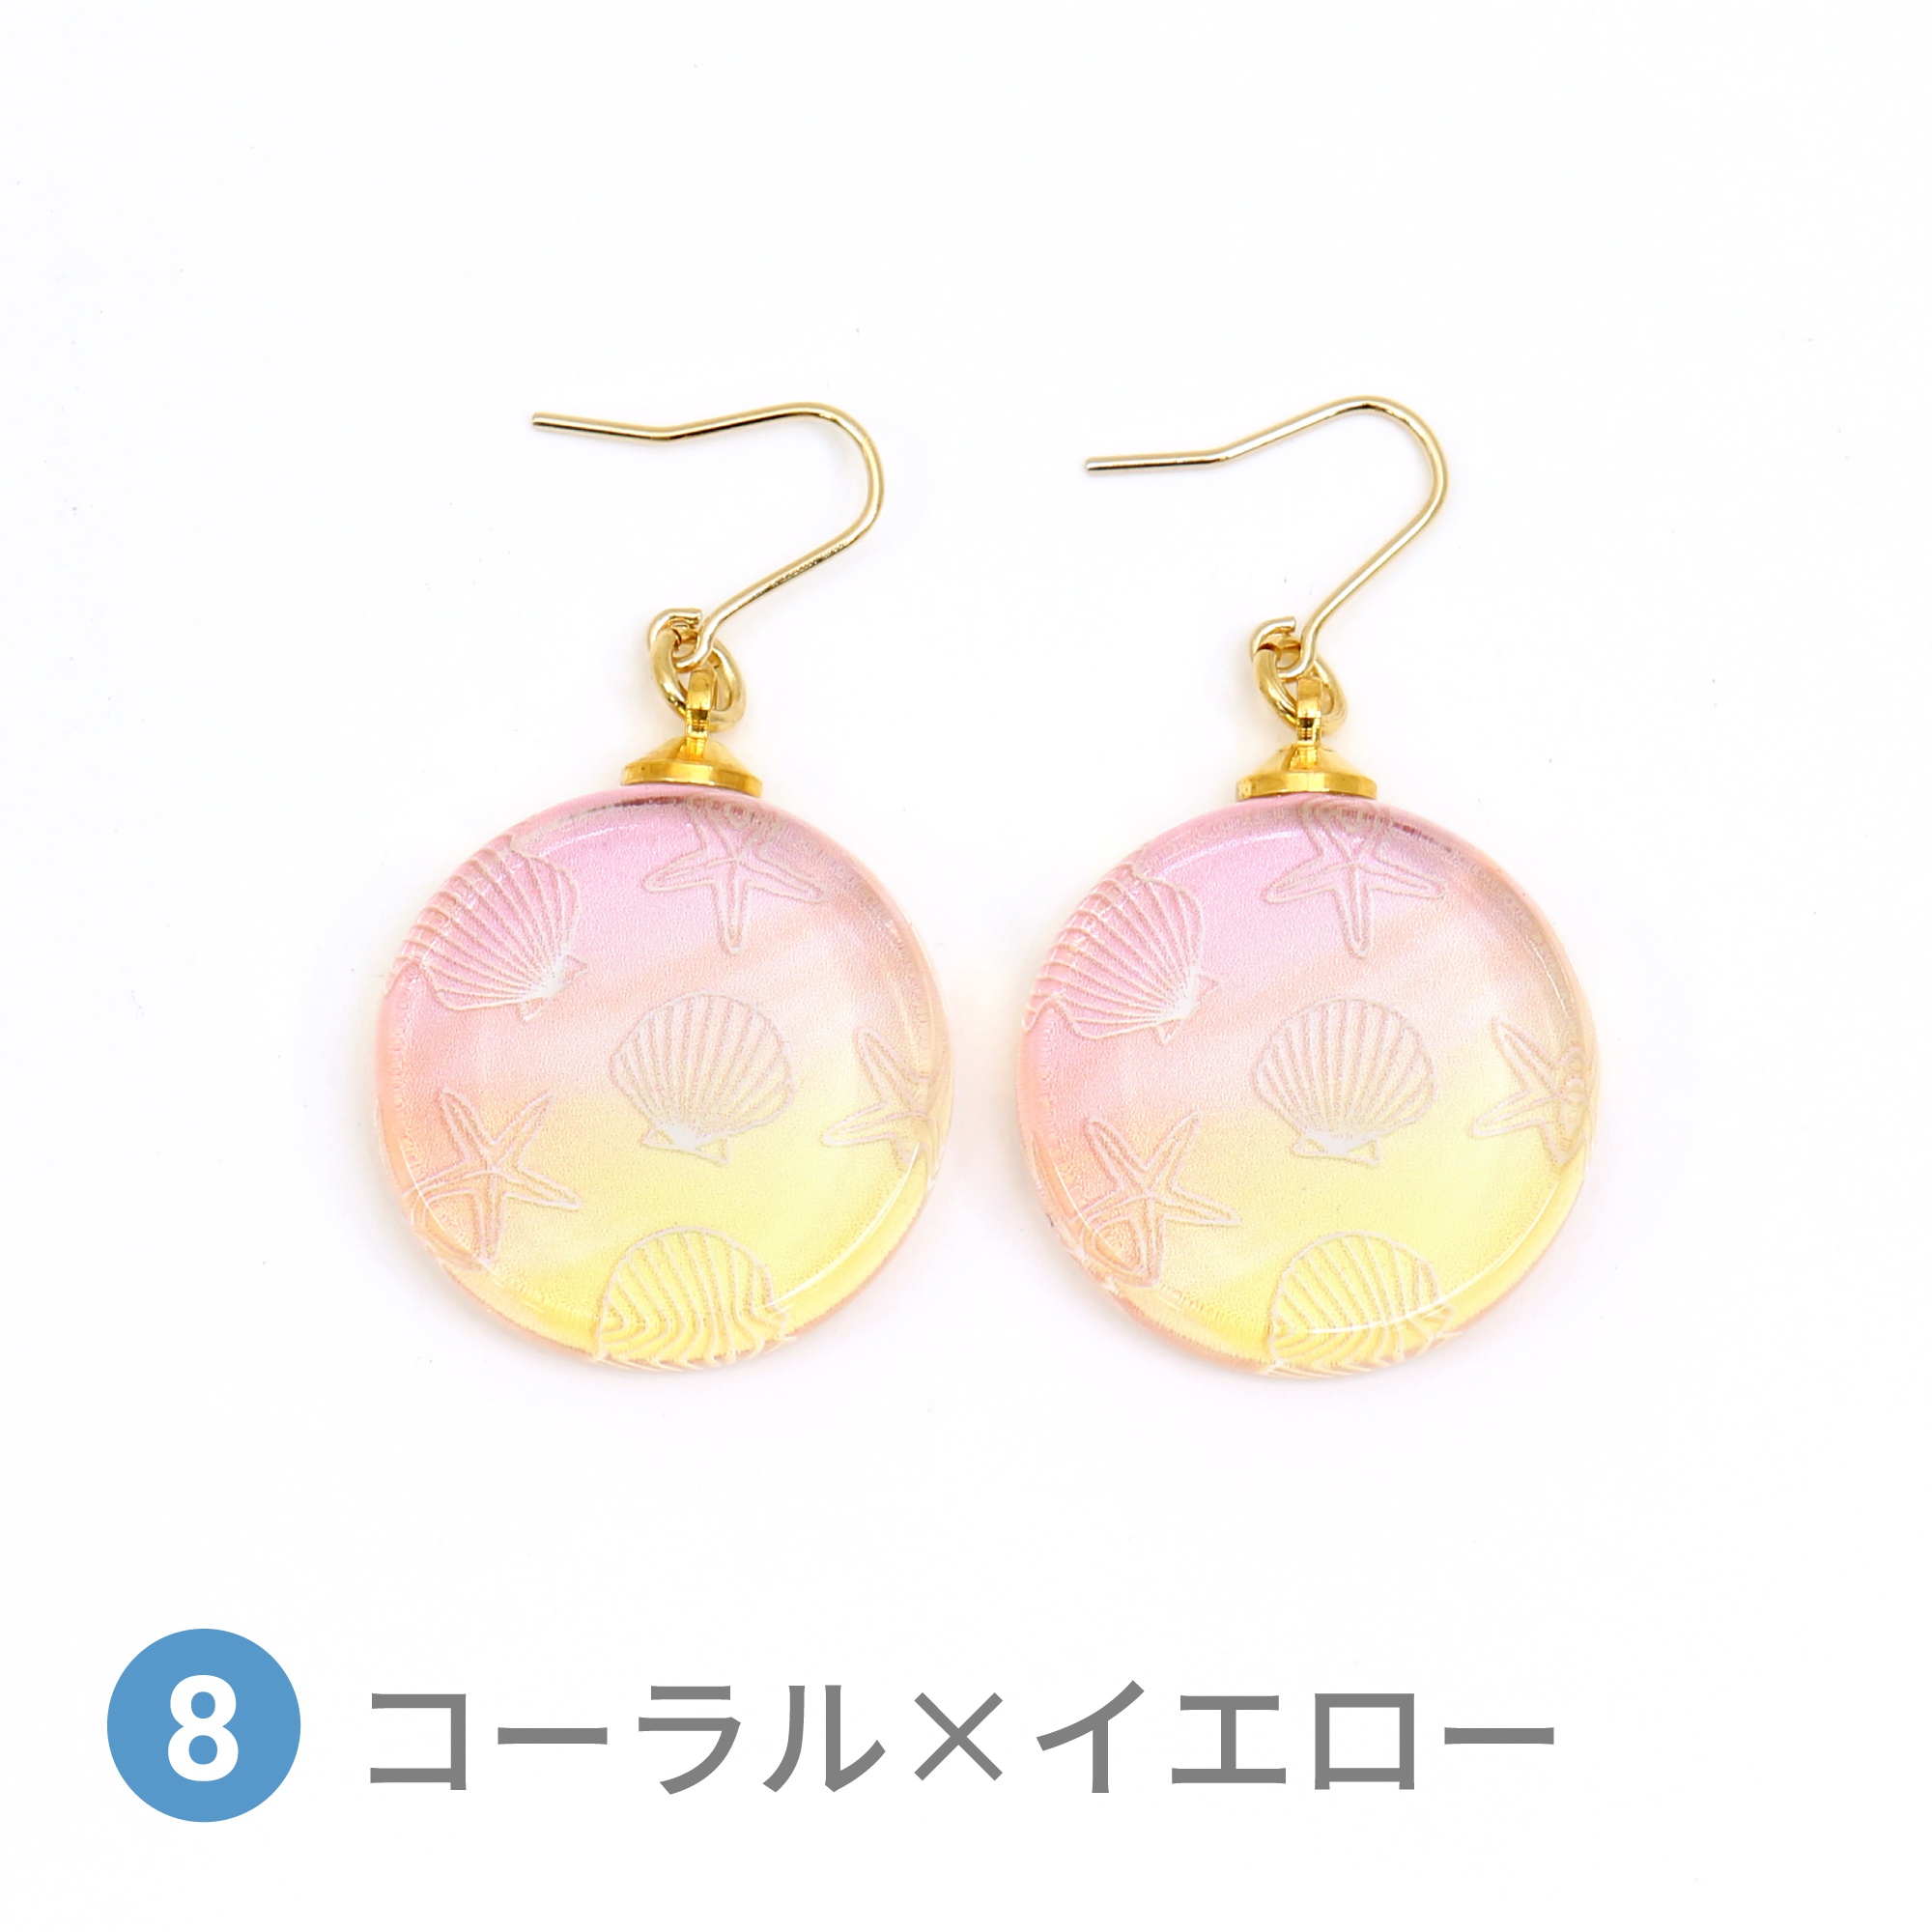 Glass accessories Pierced Earring SHELL coral&yellow round shape